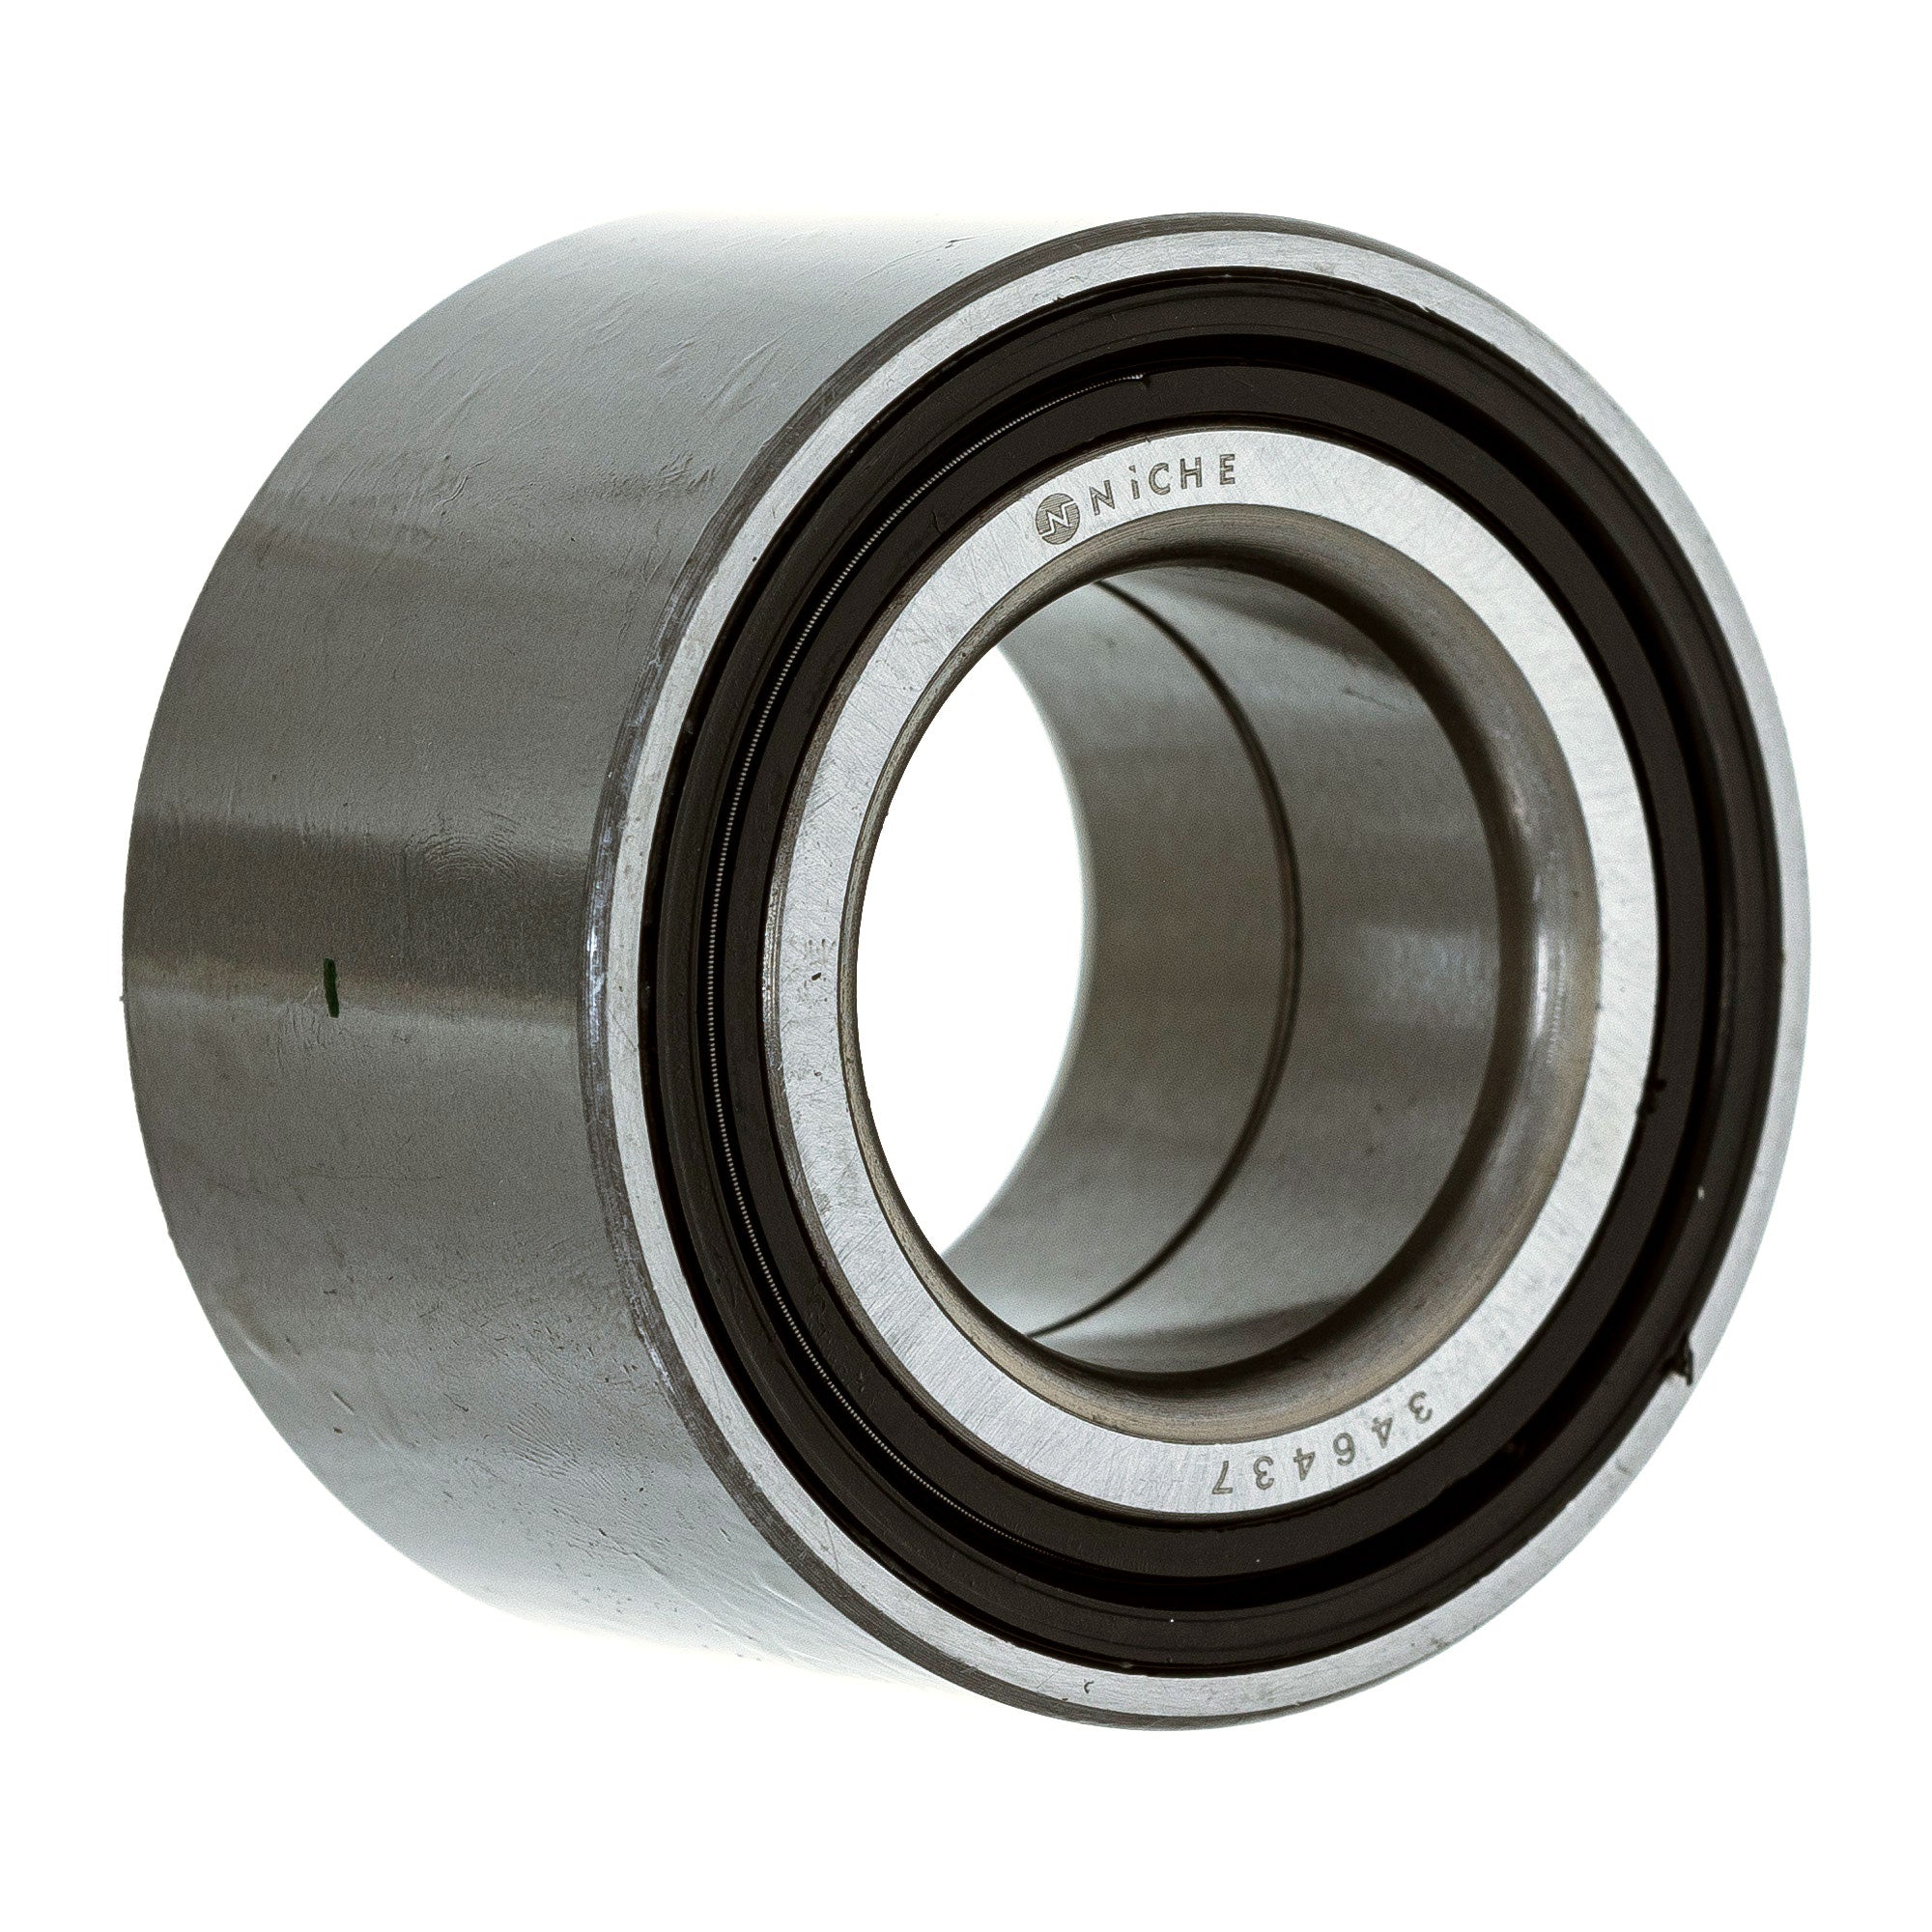 Double Row, Angular Contact, Ball Bearing for zOTHER Pioneer Big NICHE 519-CBB2200R